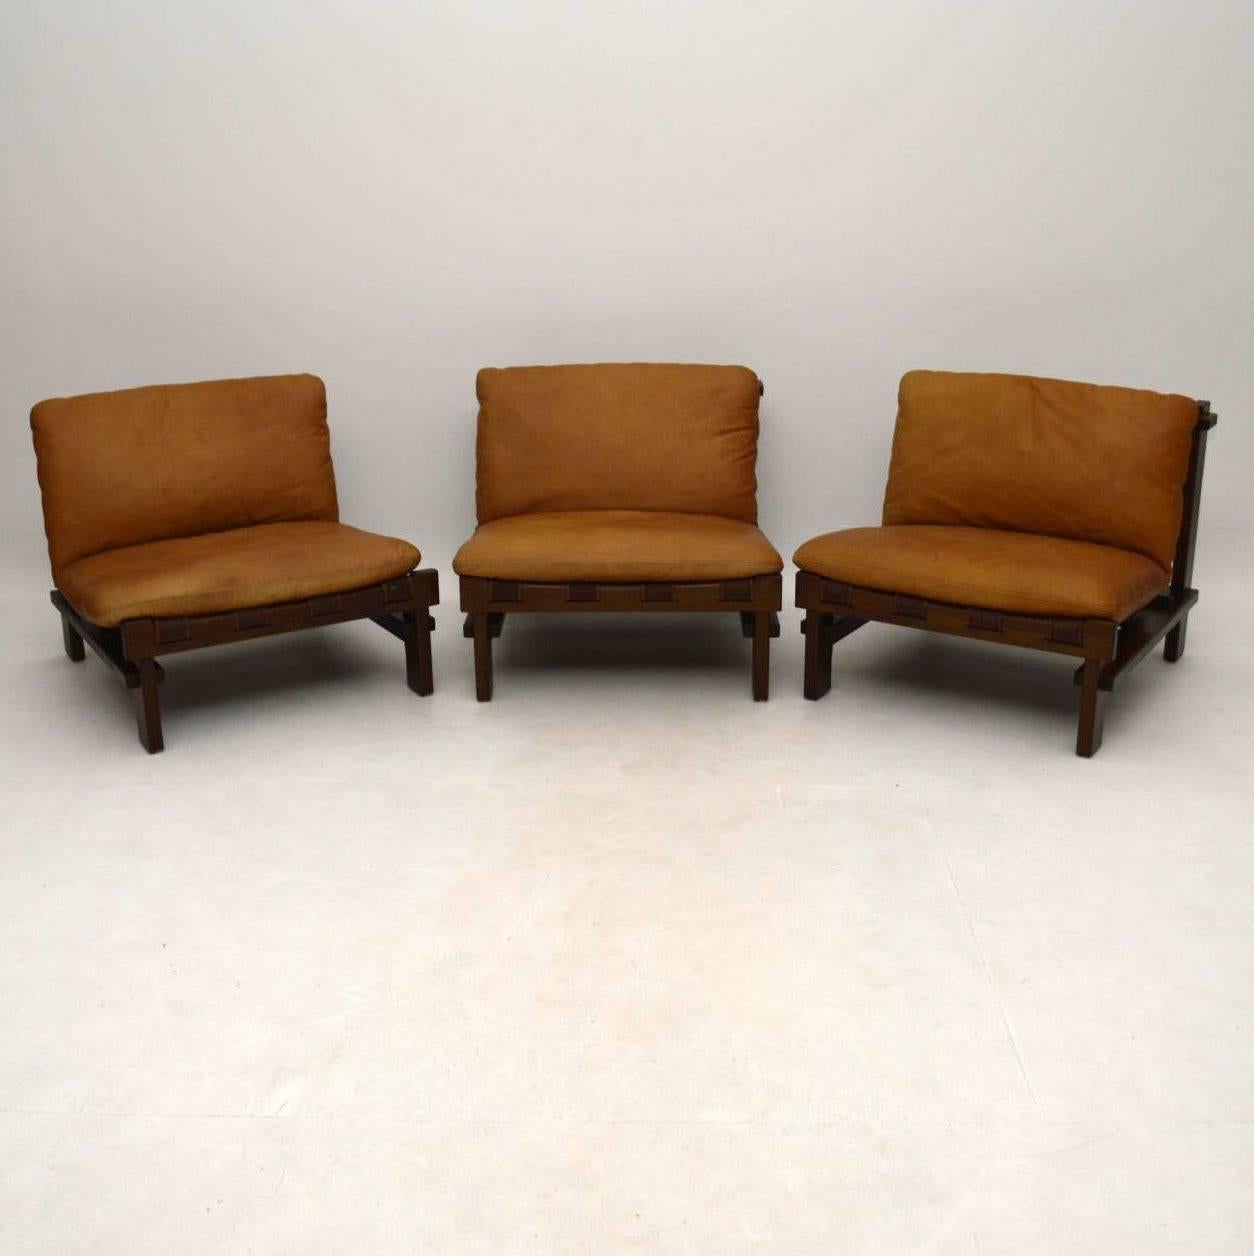 A stylish and extremely comfortable vintage leather sofa, this was made in Denmark, it dates from the 1960-1970s. It comes in three separate sections, so it can be used in a variety of configurations. It can be used as a three-seat sofa, a two-seat